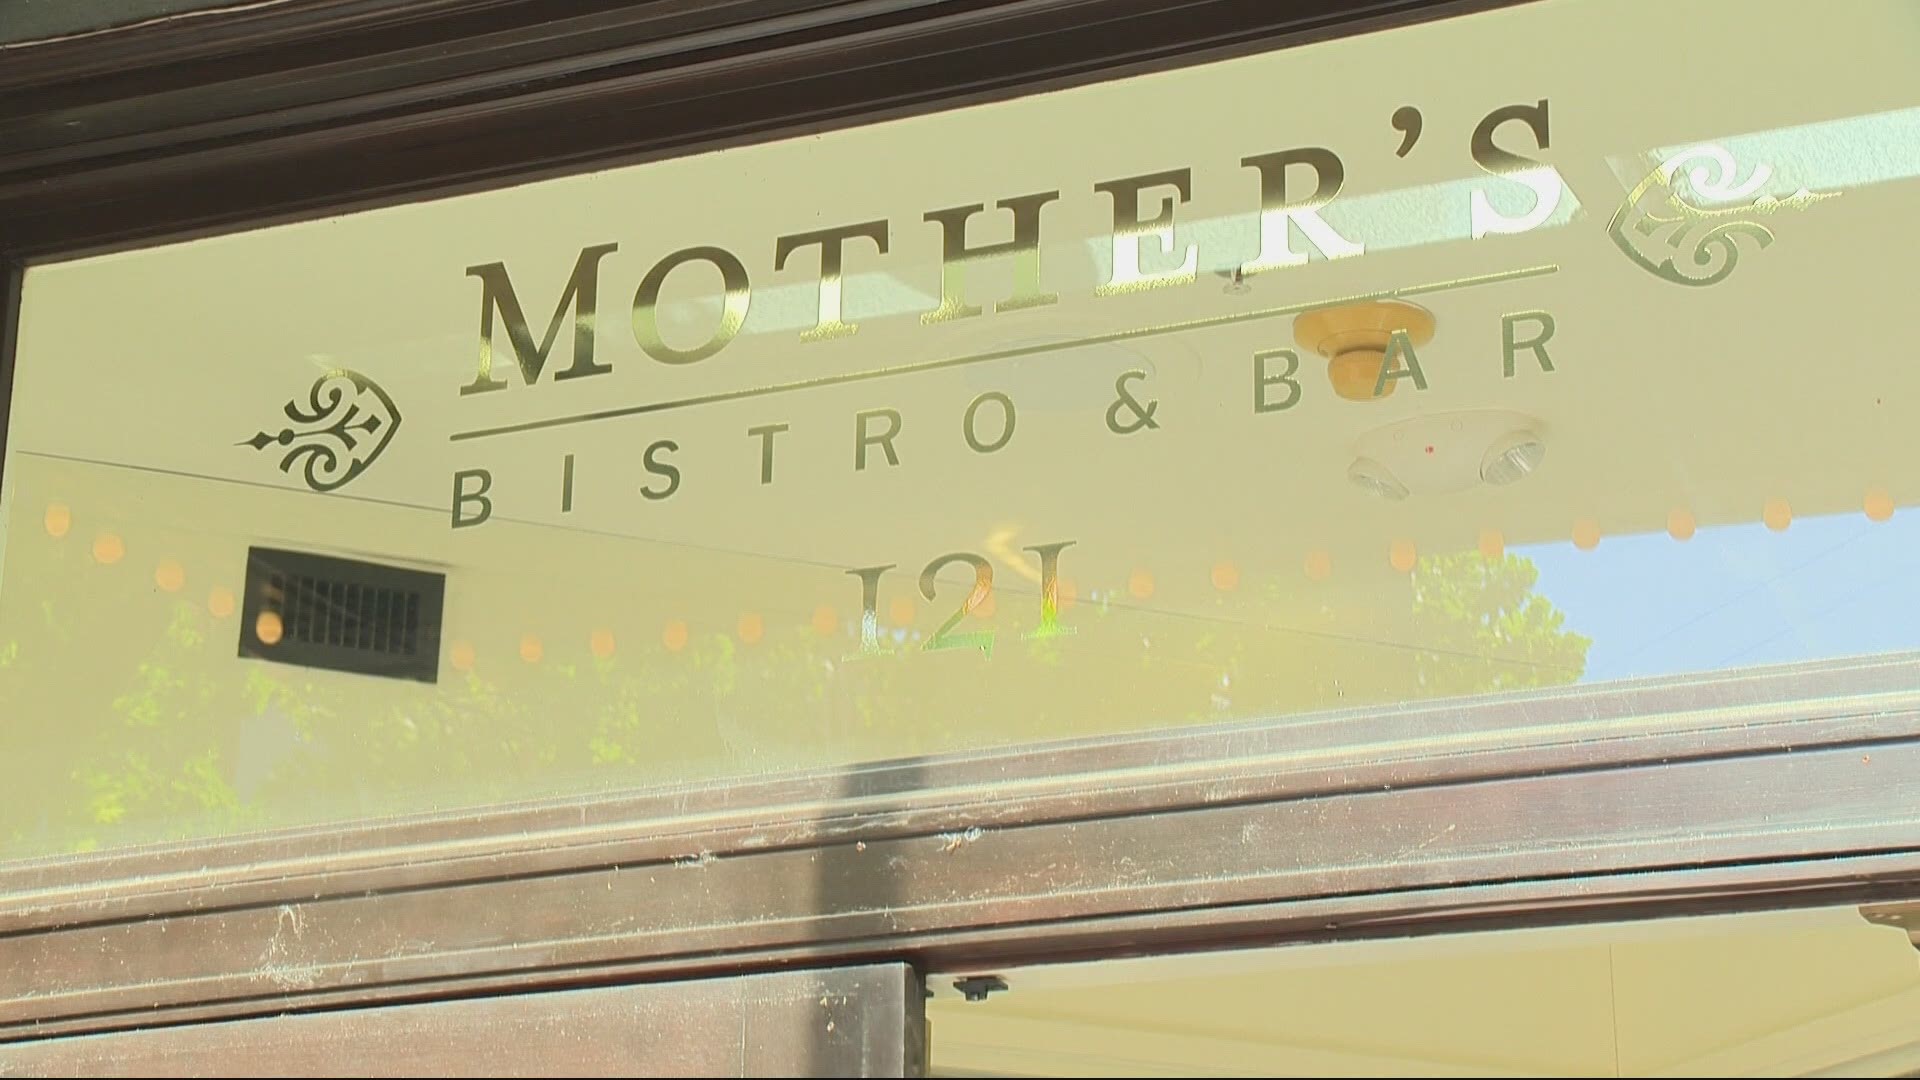 A Portland favorite is set to reopen its doors. Mother’s Bistro and Bar is ready for a new beginning after being closed for a year.